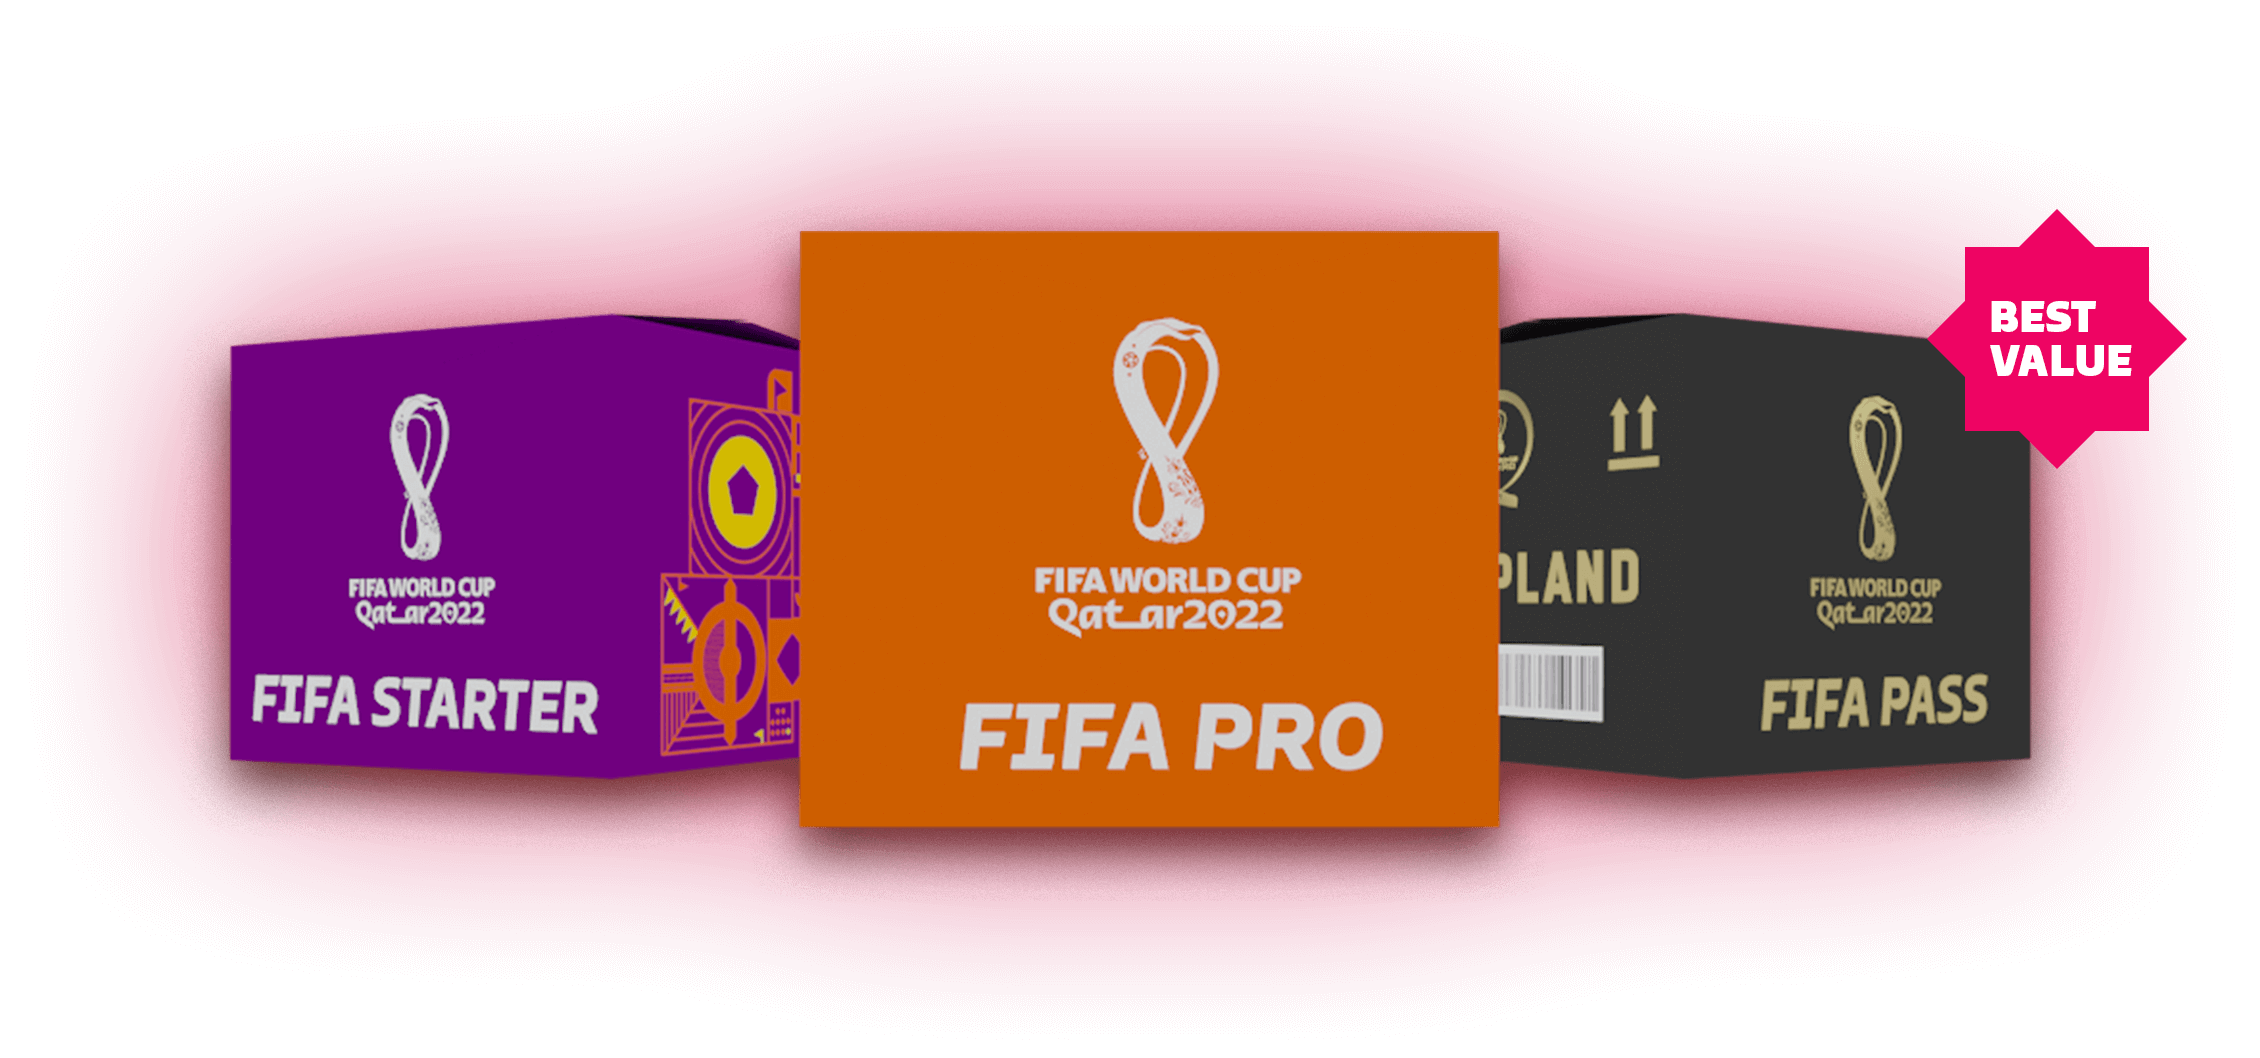 2022 FIFA World Cup png images | PNGWing